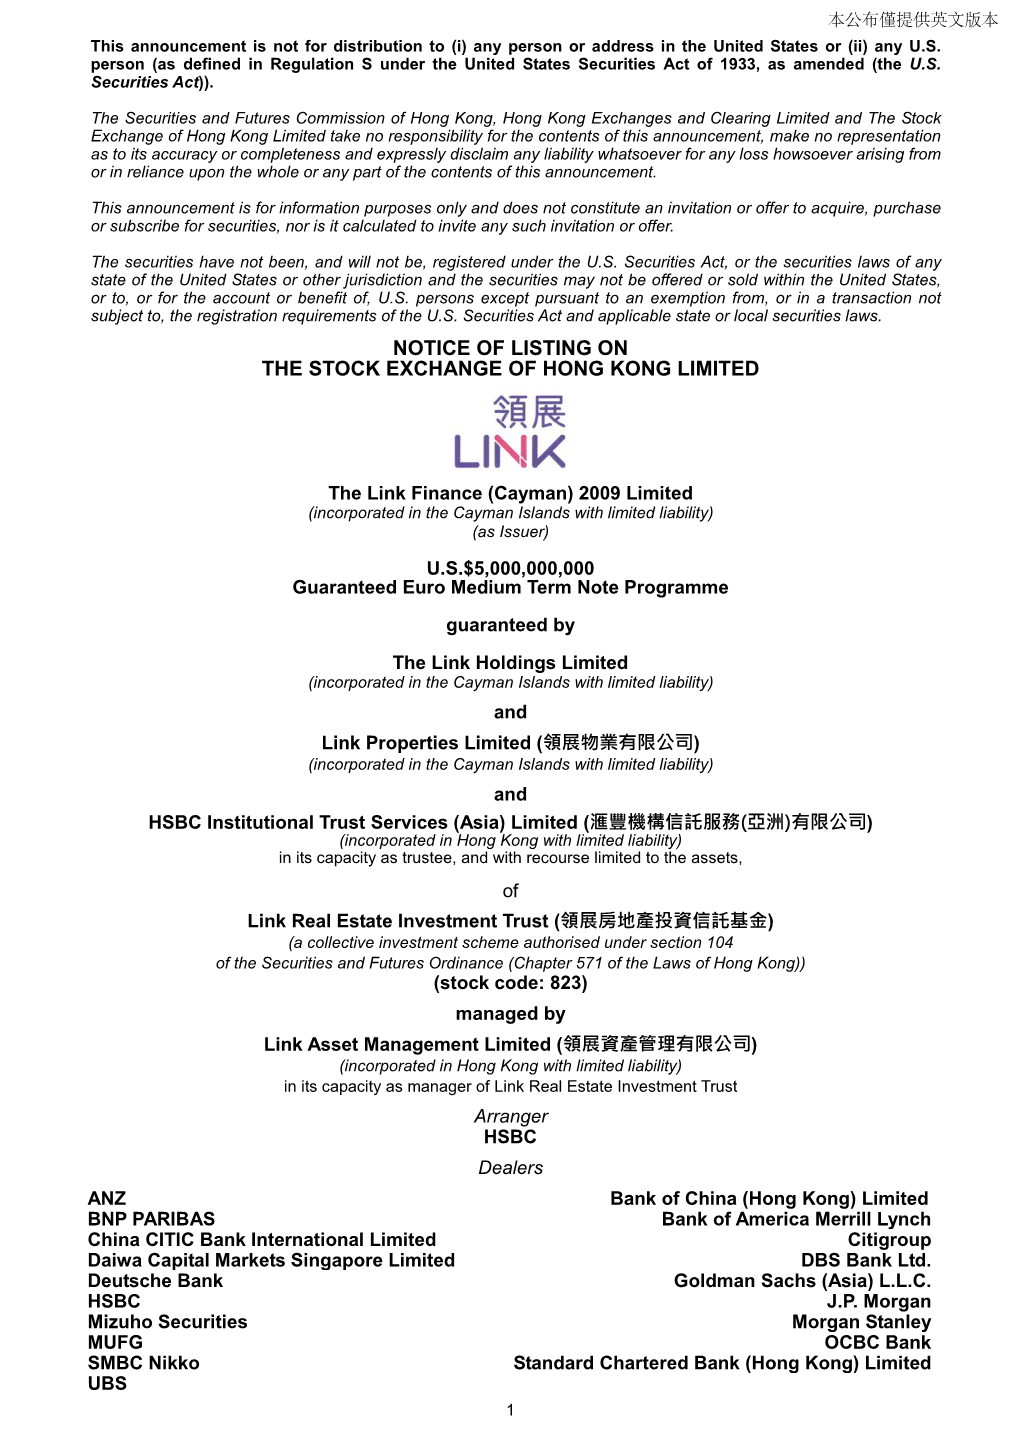 Notice of Listing on the Stock Exchange of Hong Kong Limited